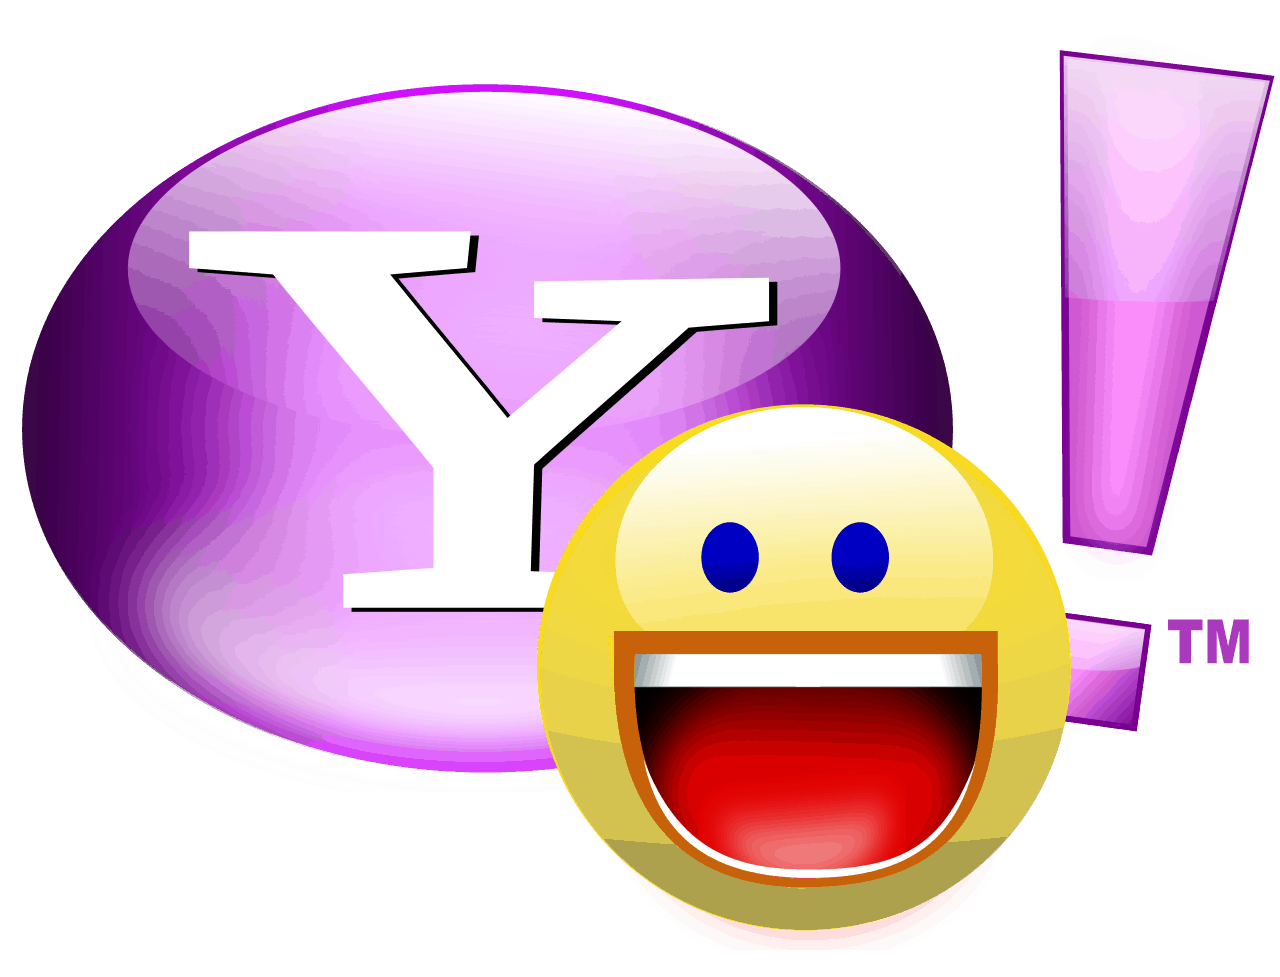 Yahoo could launch an iMessage competitor tomorrow